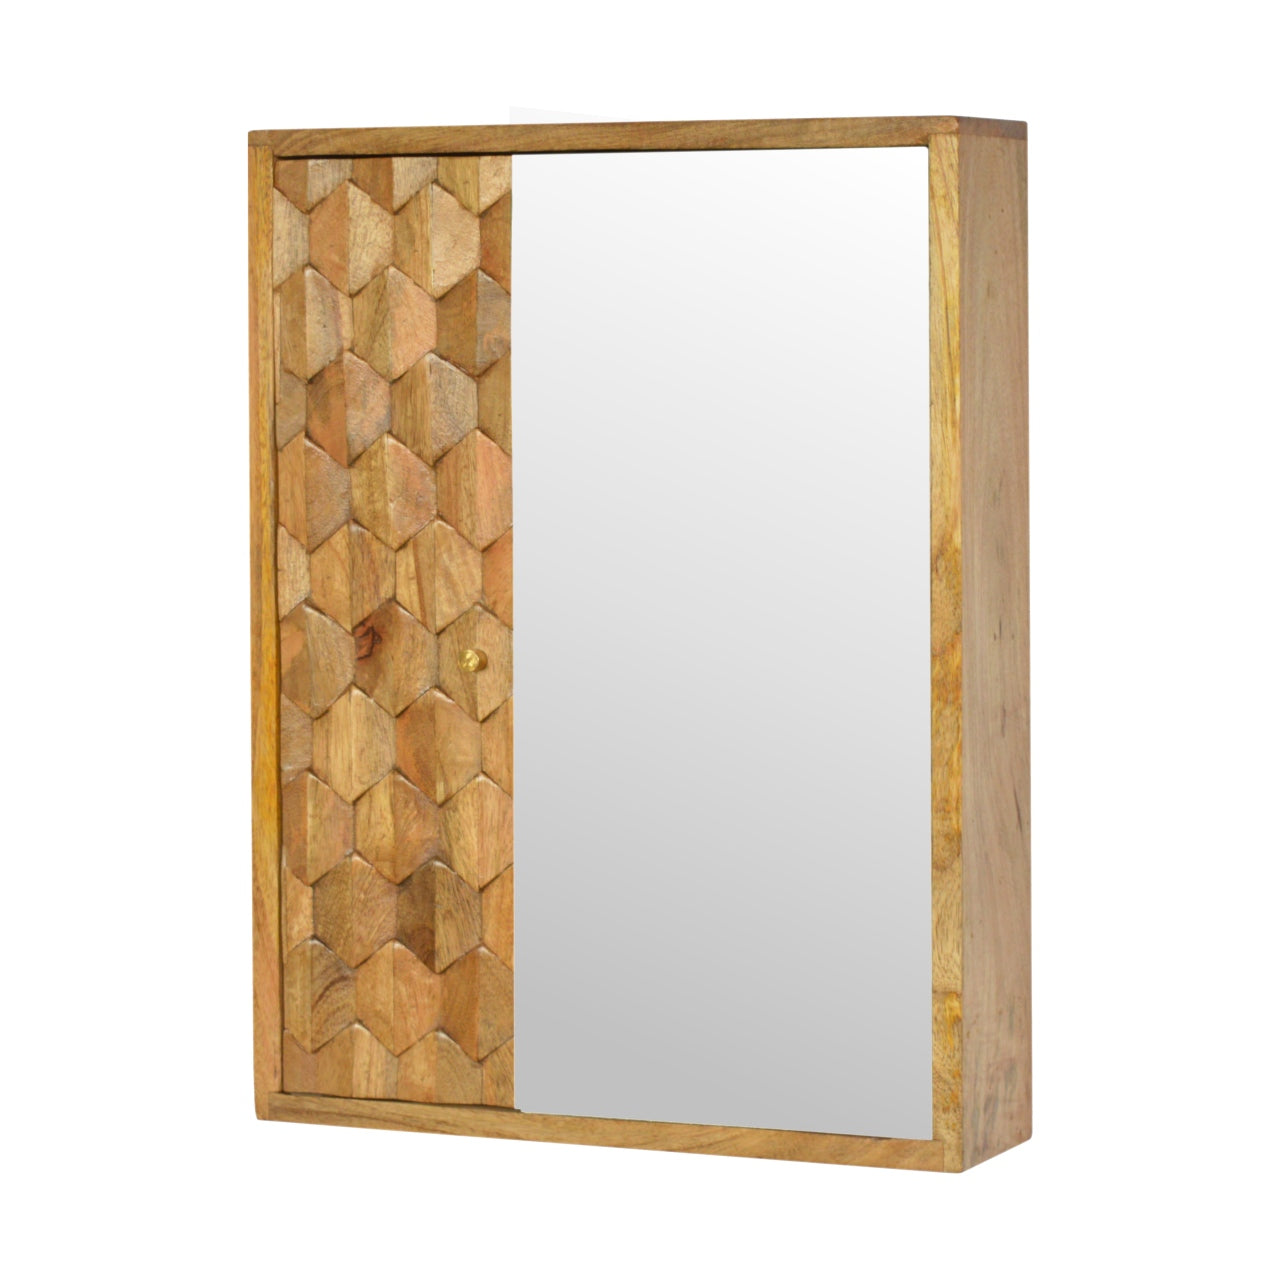 Pineapple Carved Sliding Wall Mirror Cabinet by Artisan Furniture